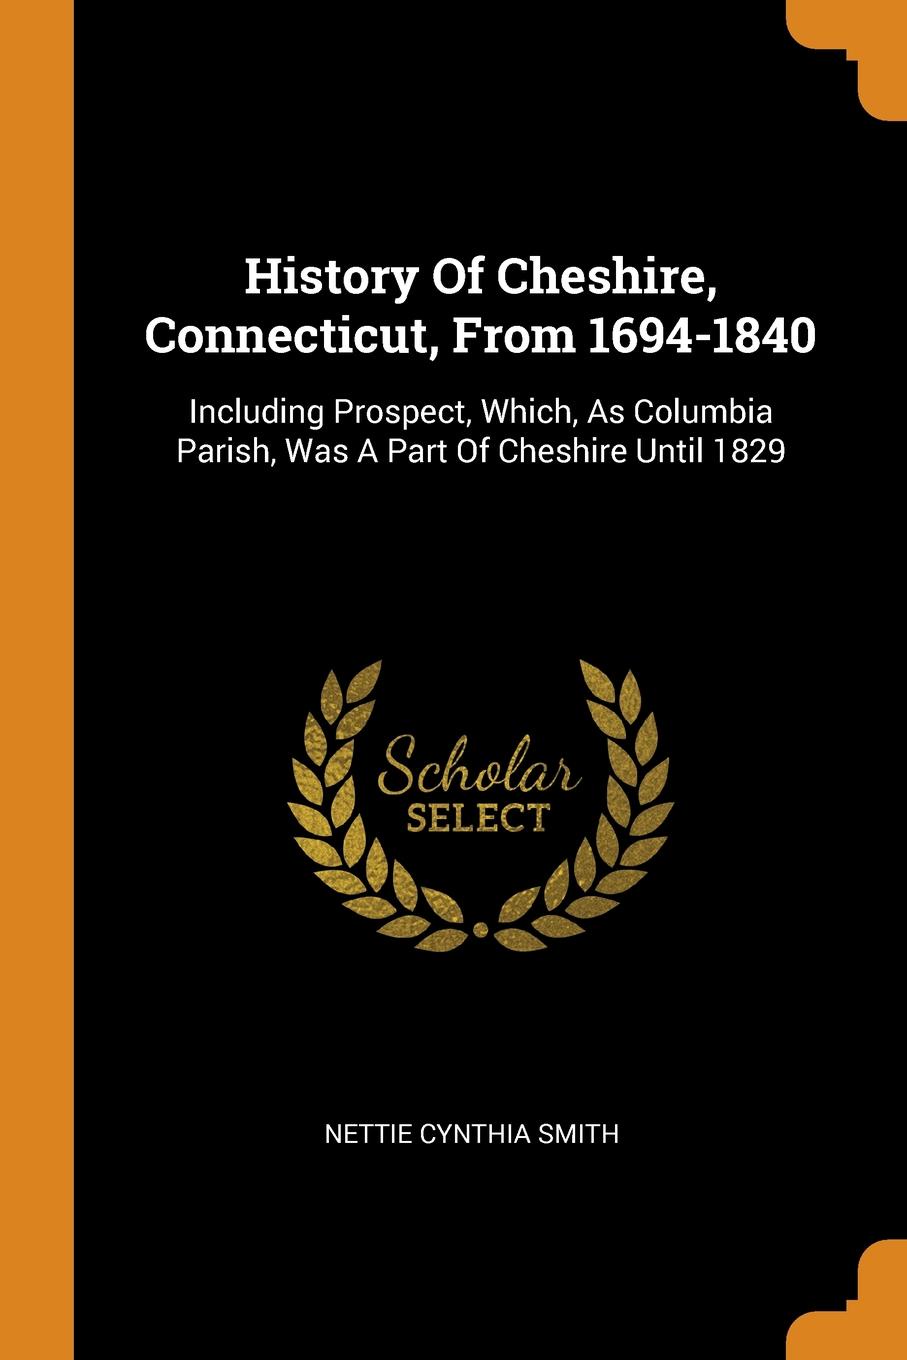 History Of Cheshire, Connecticut, From 1694-1840. Including Prospect, Which, As Columbia Parish, Was A Part Of Cheshire Until 1829